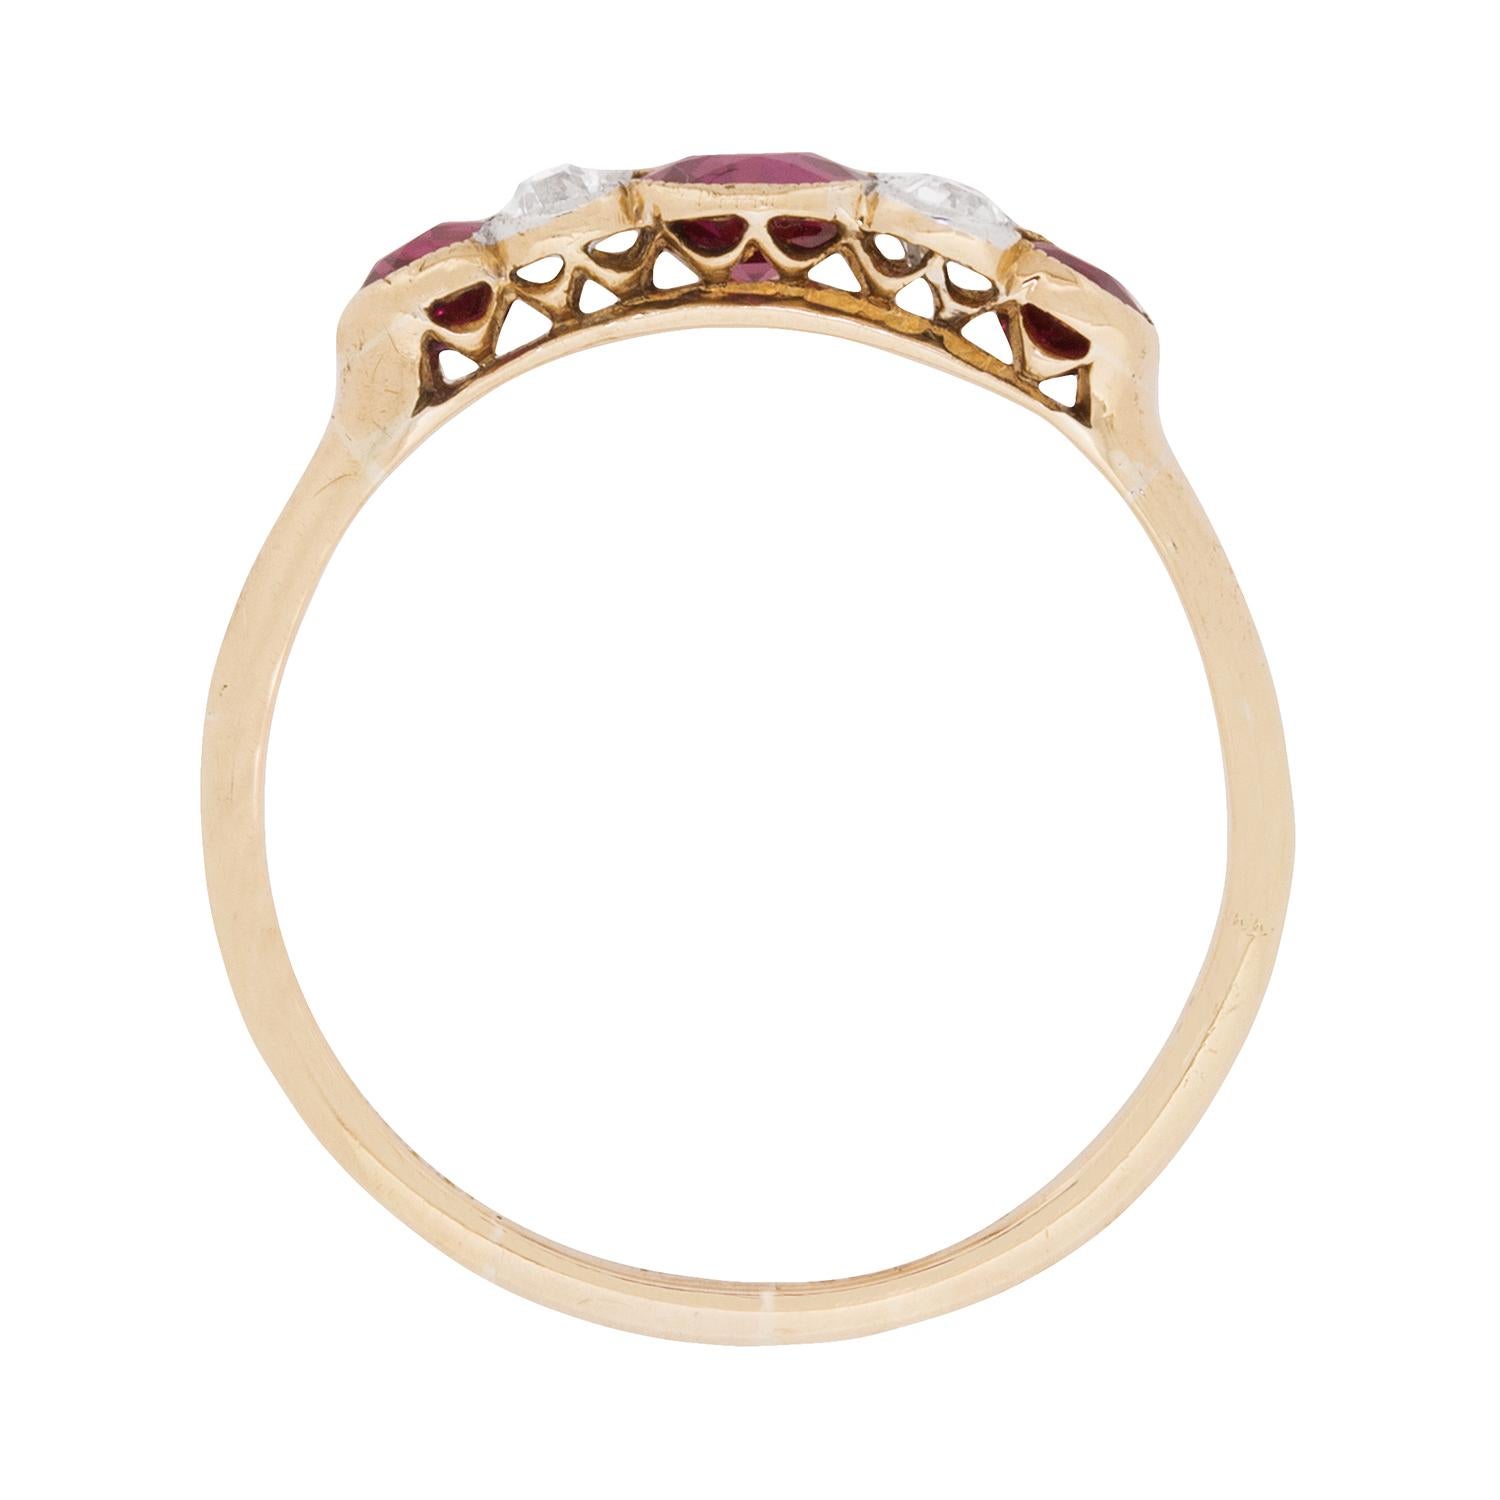 This classic late Victorian era ‘five stone’ ring features a colourful trio of old cut rubies interspersed with pairs of old cut diamonds, all set in rubover mountings with millegrain edging.

Handmade around the turn of the twentieth century, this